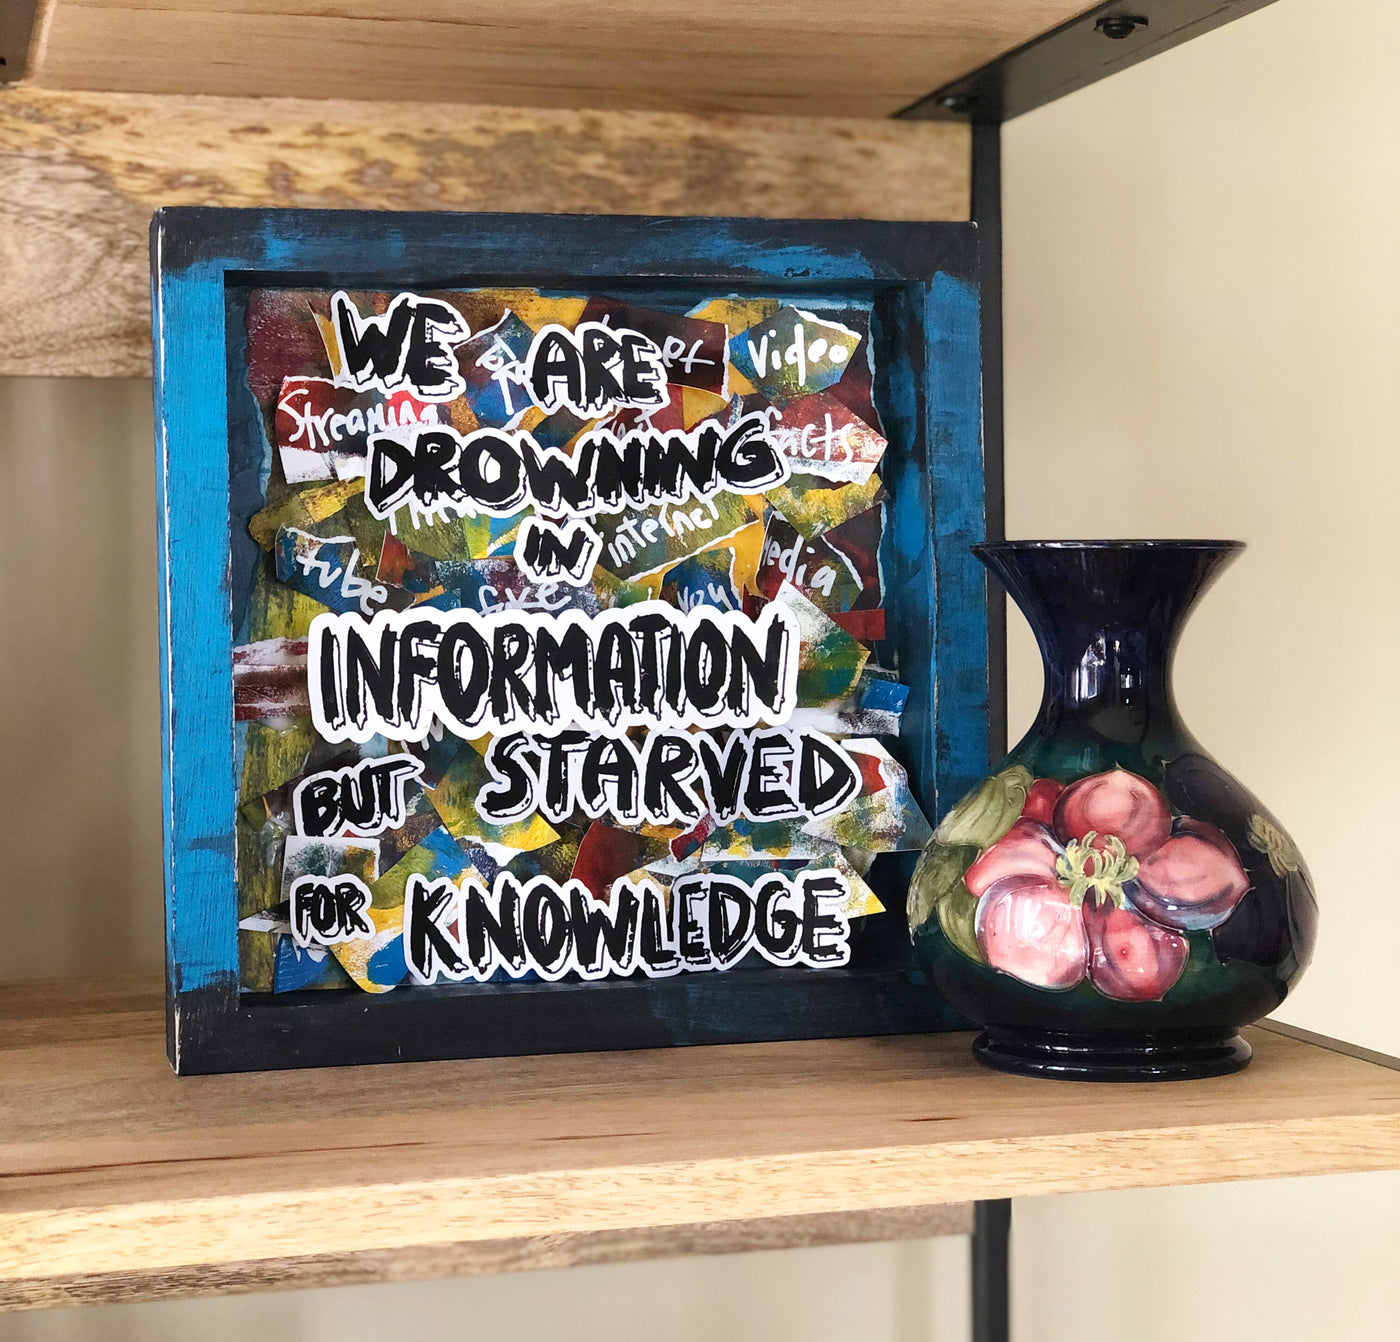 wooden box painted blue and black with brightly colored paper scraps and the words, "we are drowning in information but starved for knowledge."